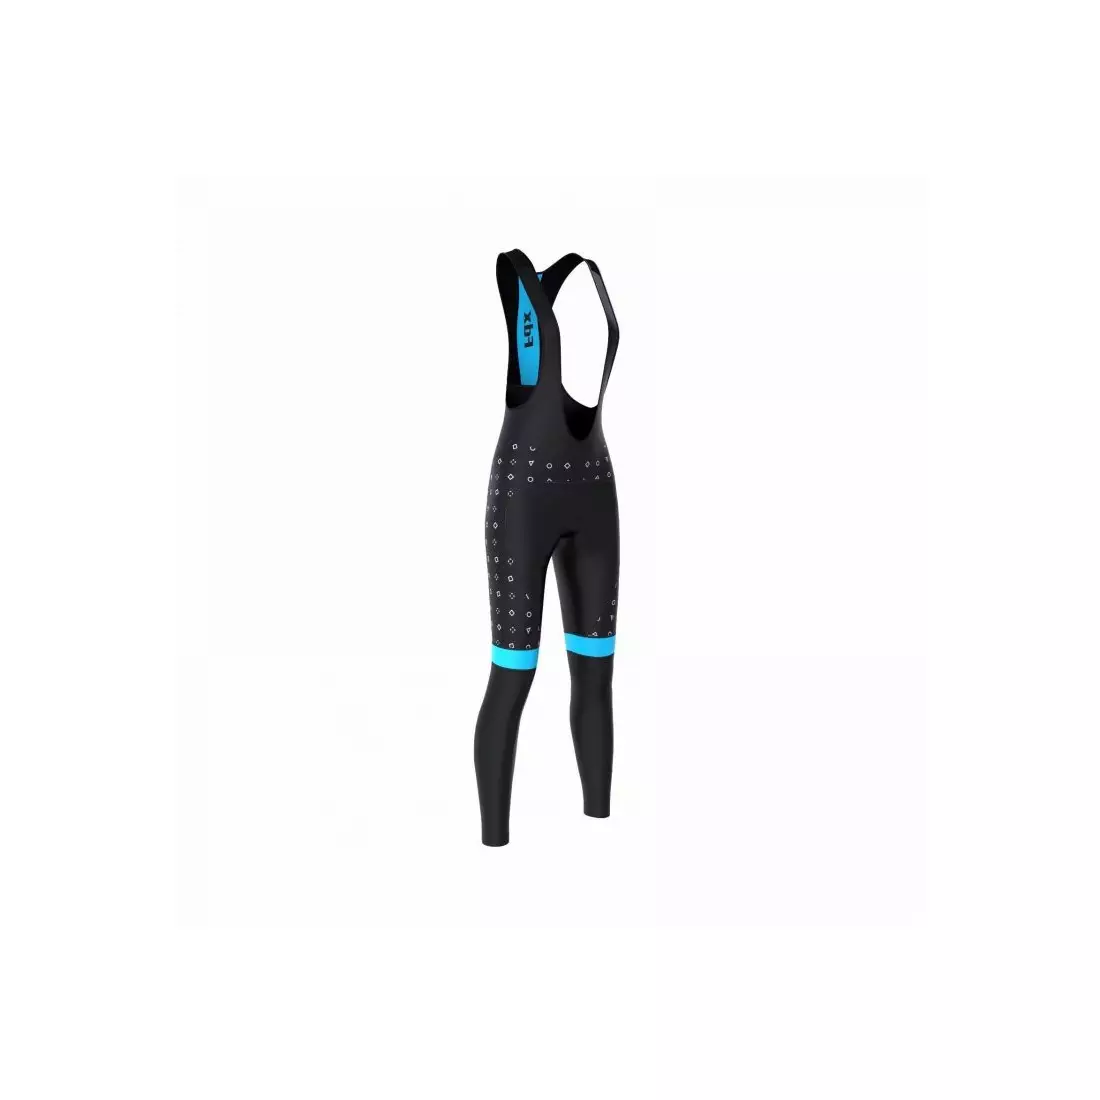 FDX 1490 women's insulated cycling trousers with suspenders, black and blue